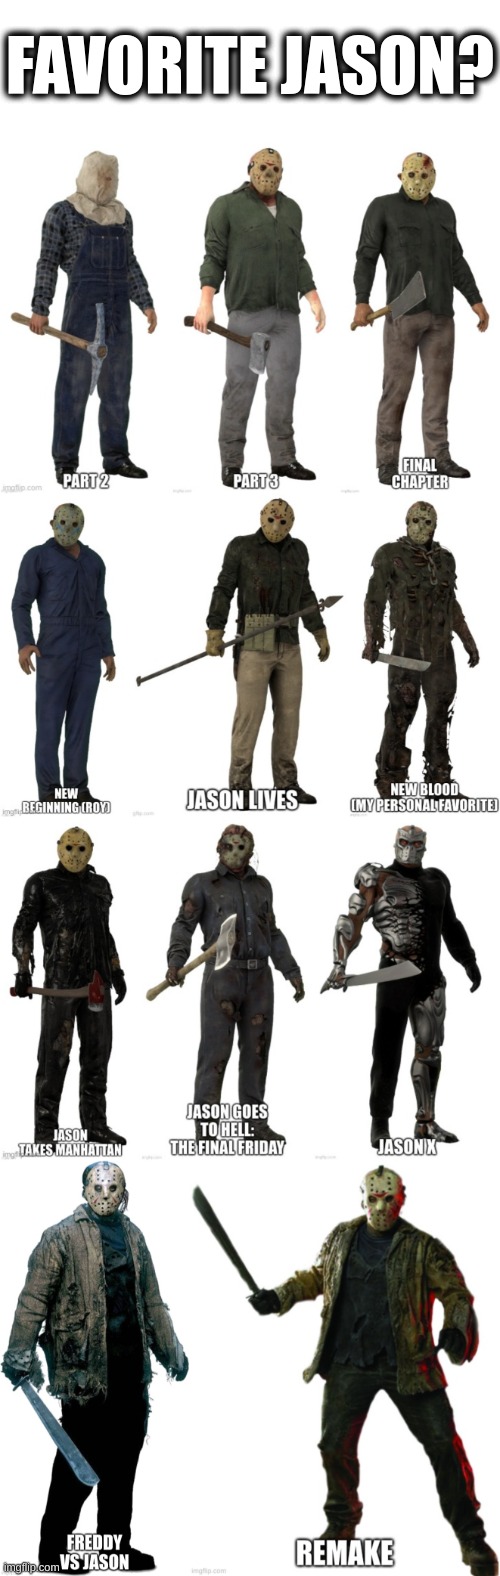 FAVORITE JASON? | image tagged in jason voorhees,friday the 13th,hockey,evolution,axe,serial killer | made w/ Imgflip meme maker